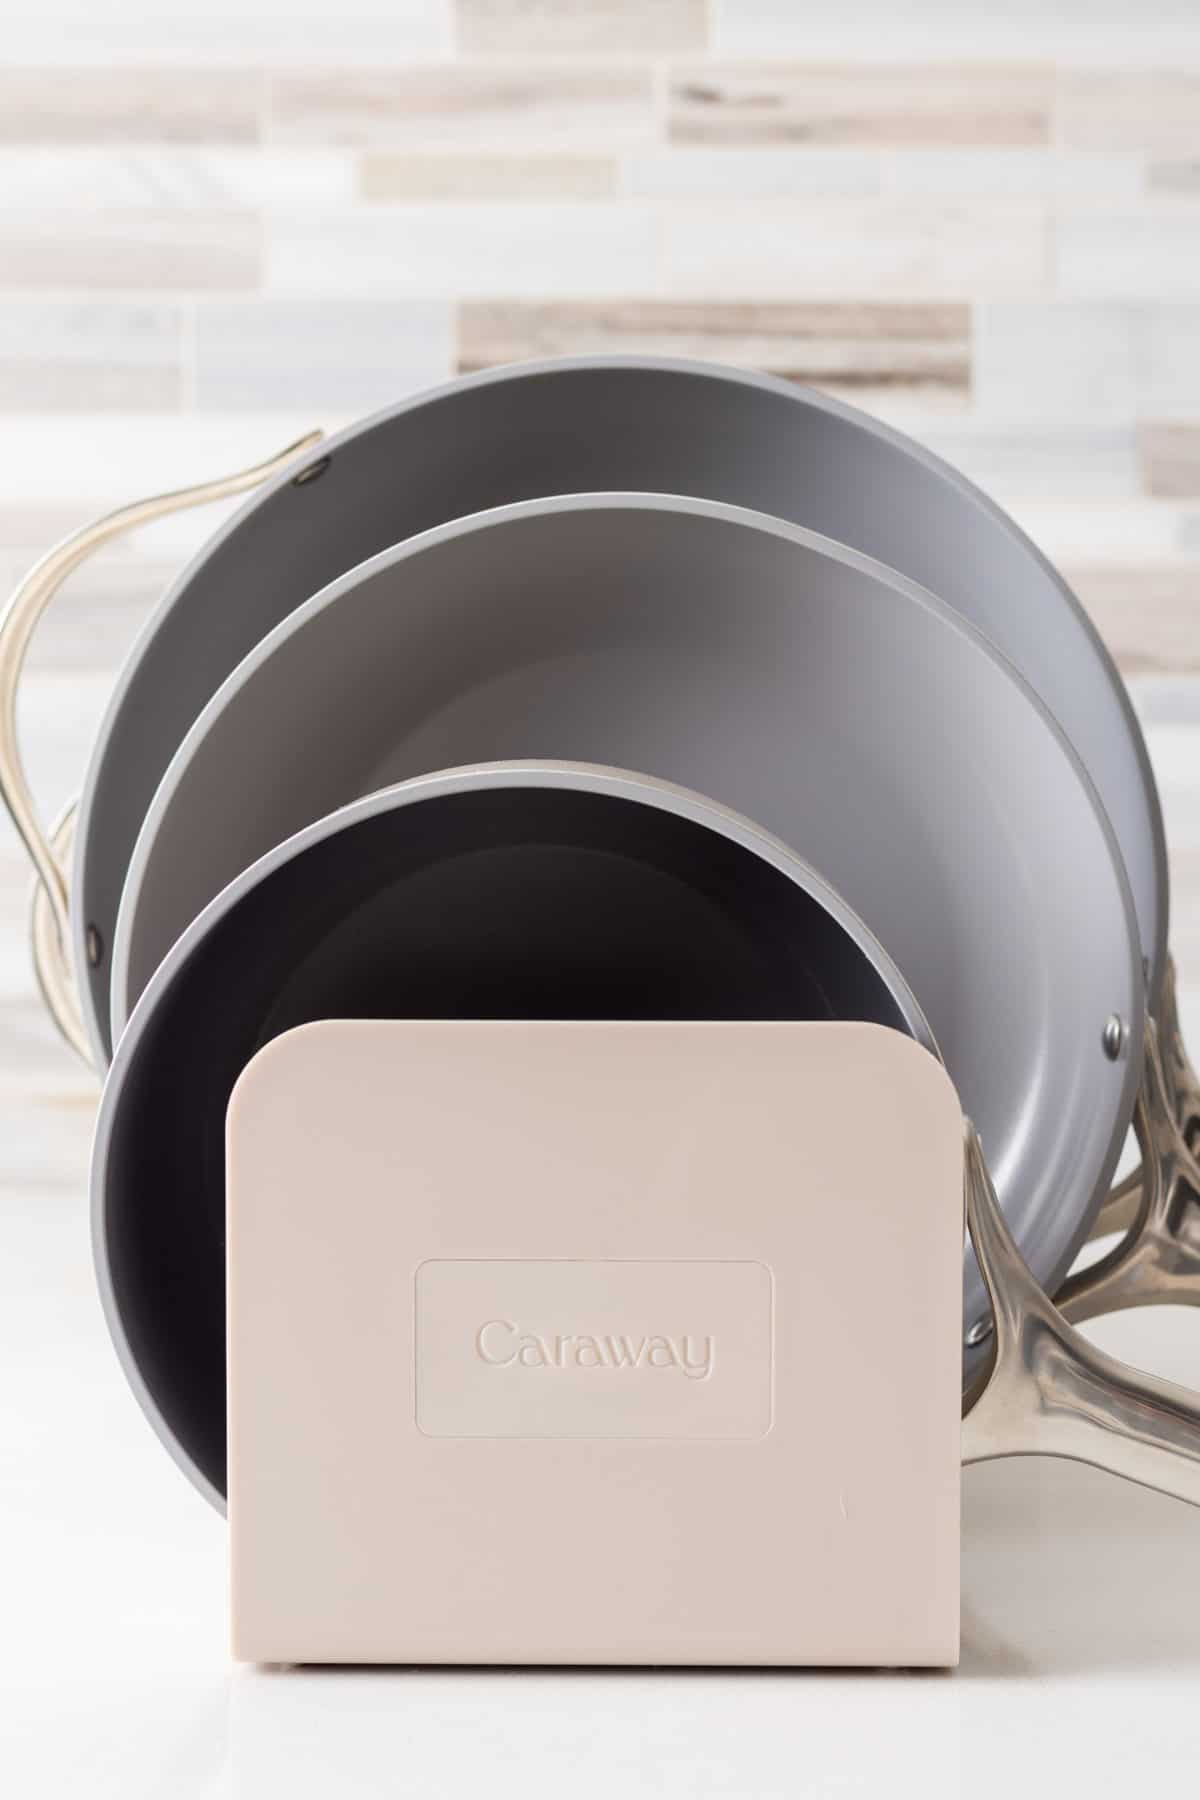 Caraway logo on cookware stand.